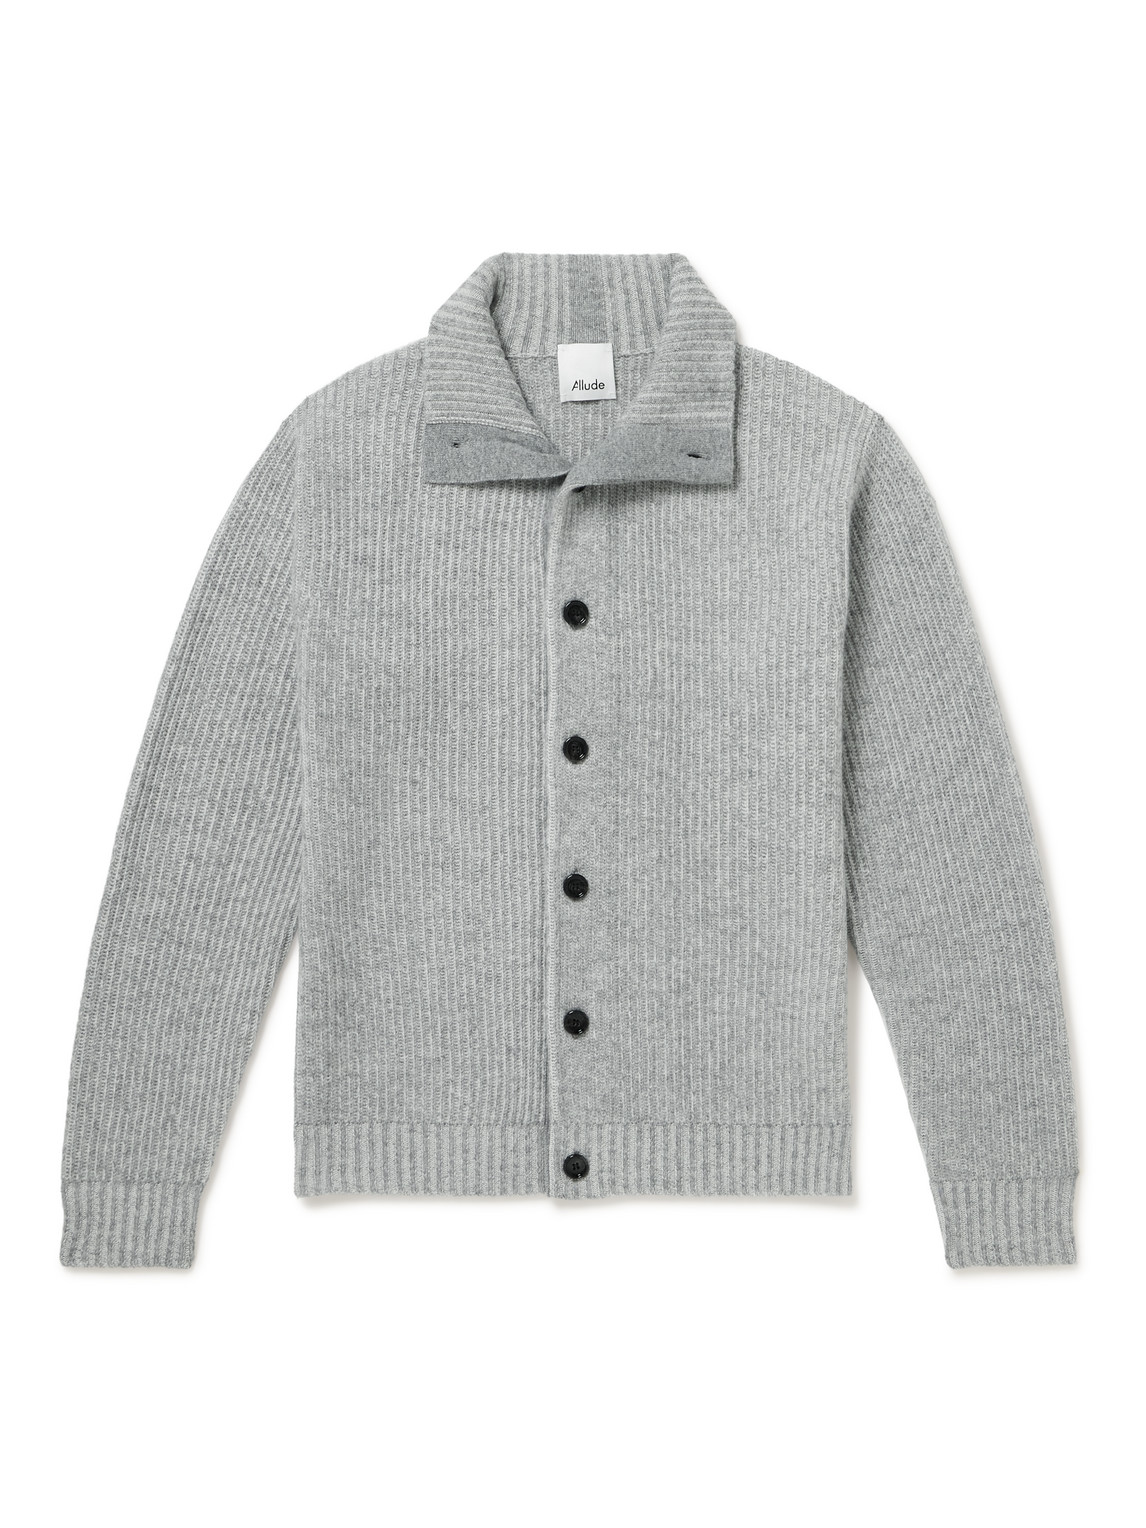 Allude Ribbed Cashmere Cardigan In Gray